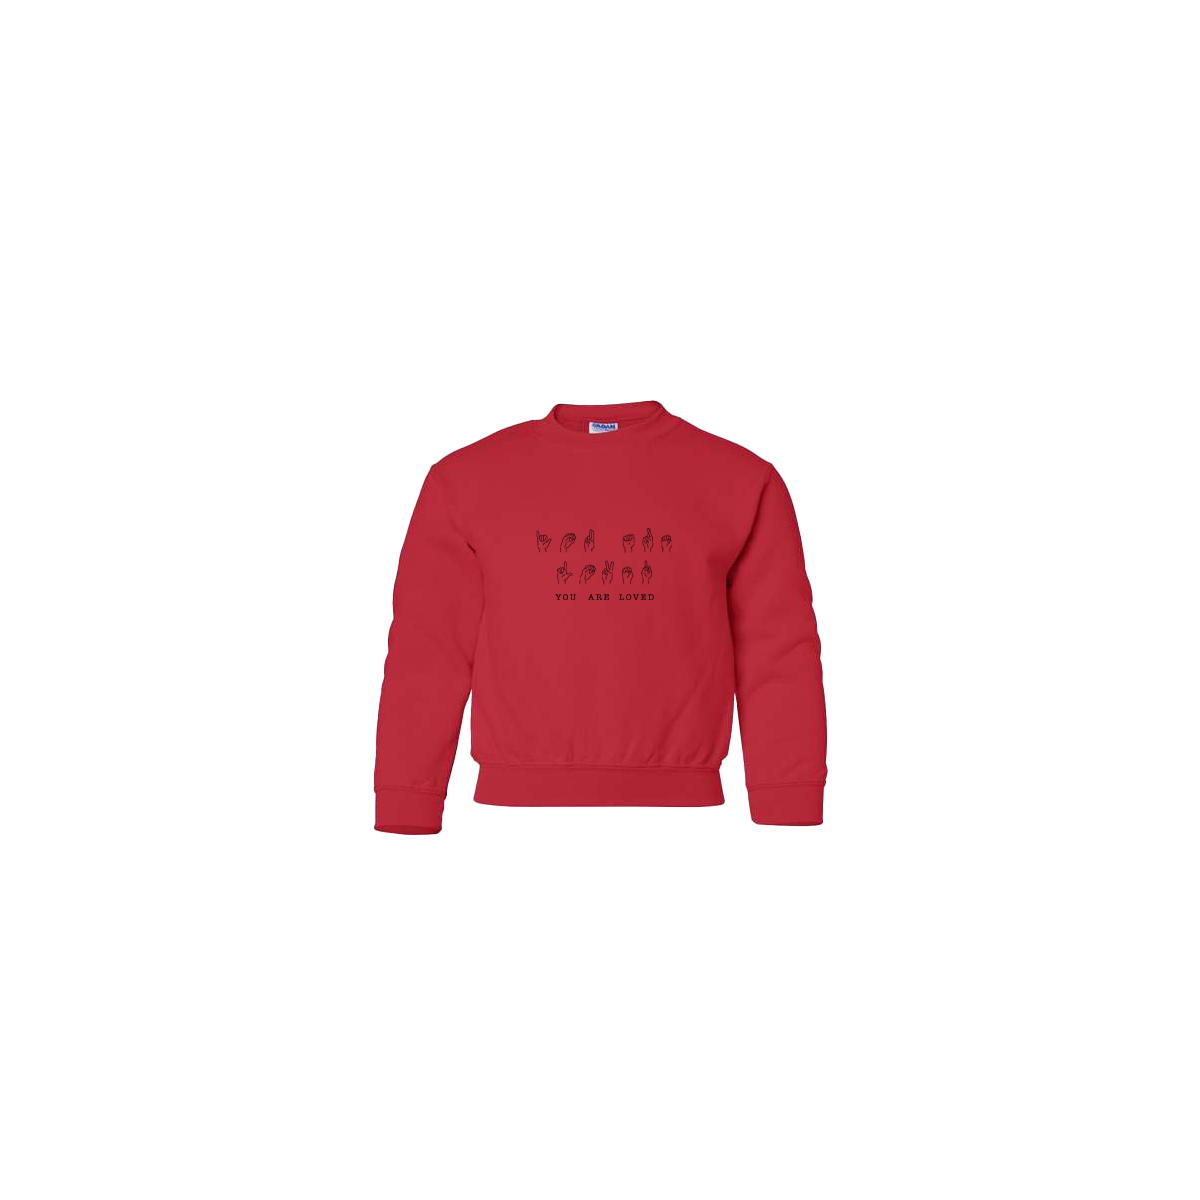 You Are Loved Sign Language Embroidered Red Youth Crewneck